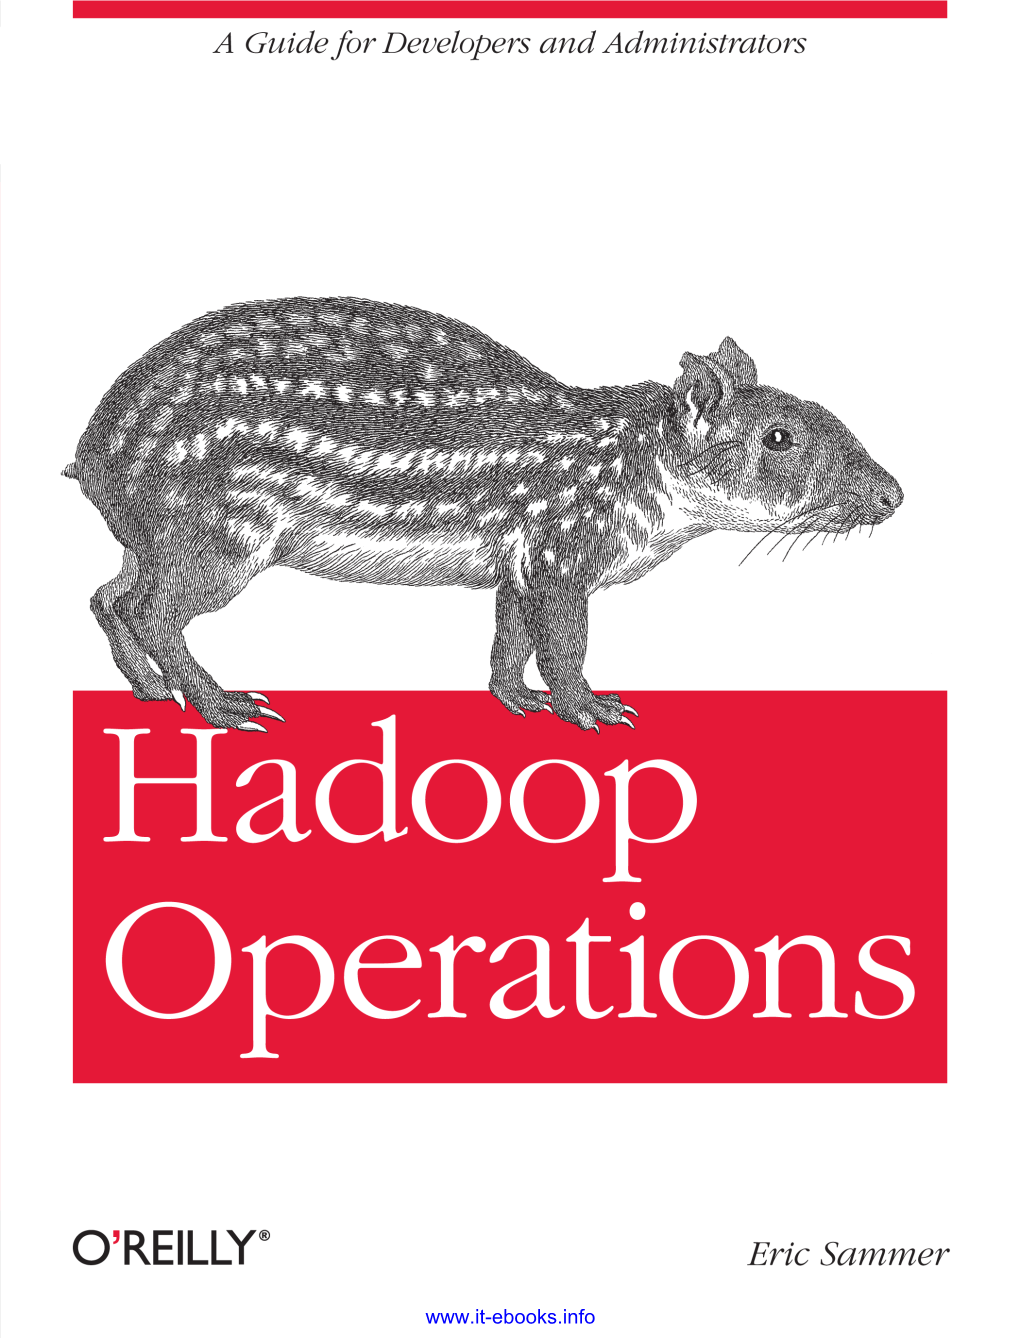 Hadoop Operations by Eric Sammer